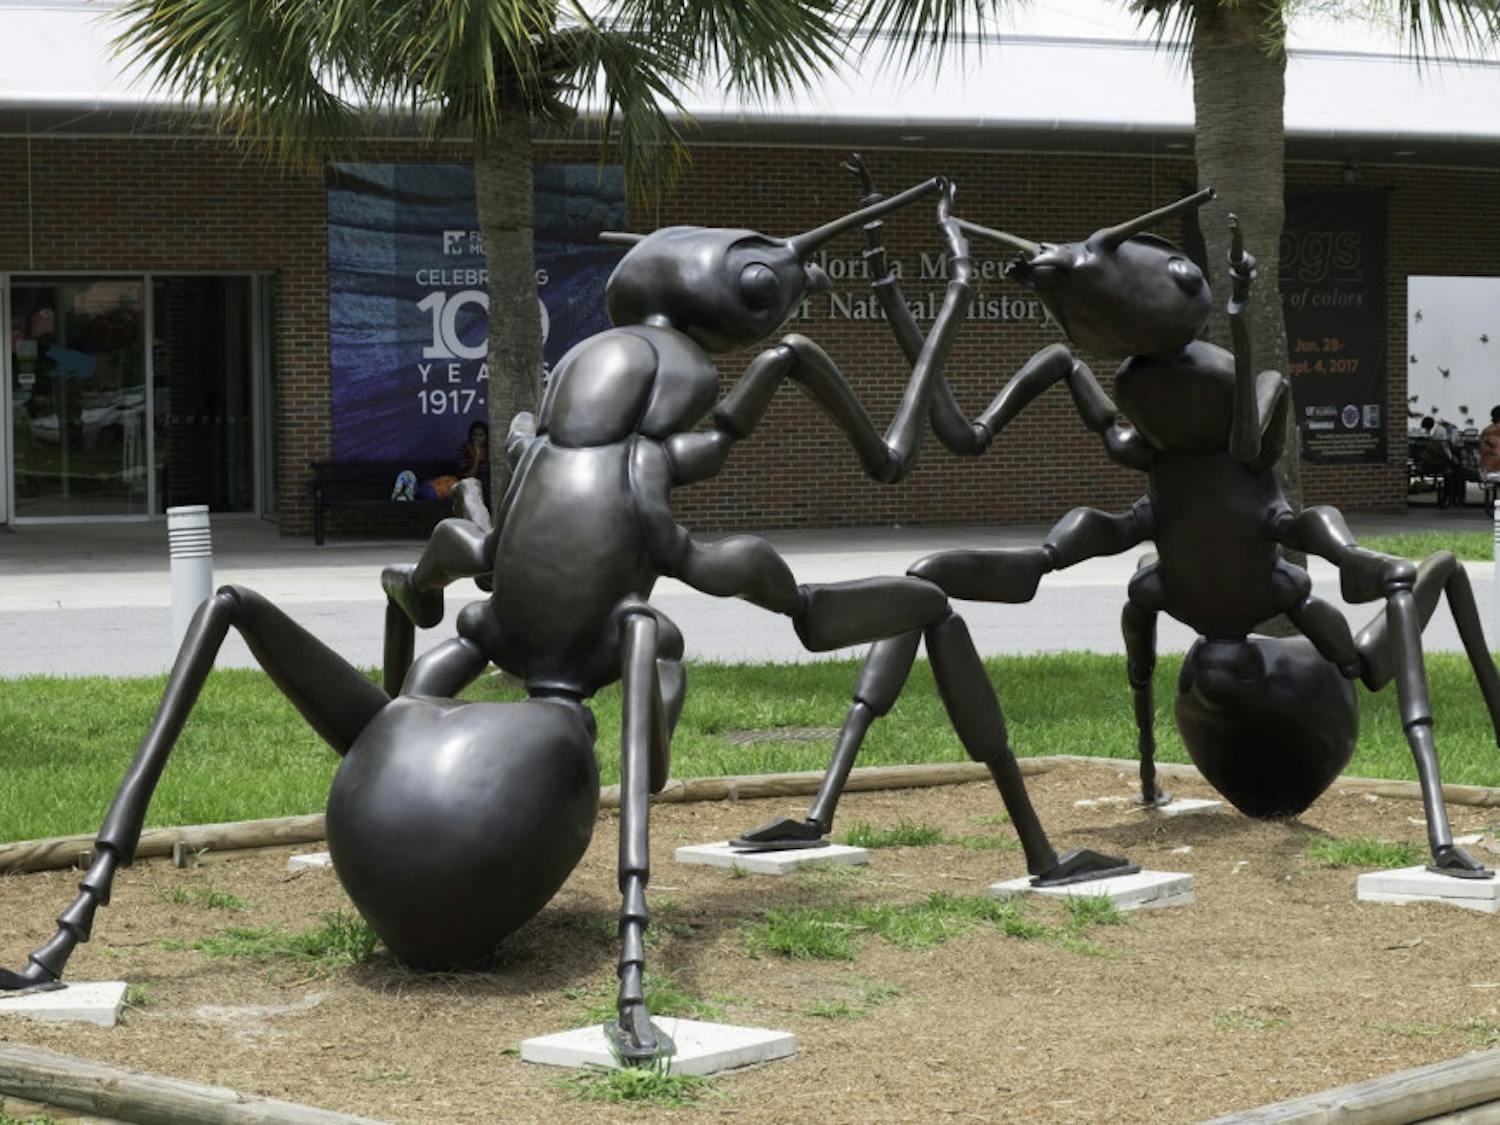 The Florida Museum of Natural History’s ant statues, “X” and “O,” were given back to the artist after spending two years in Gainesville.